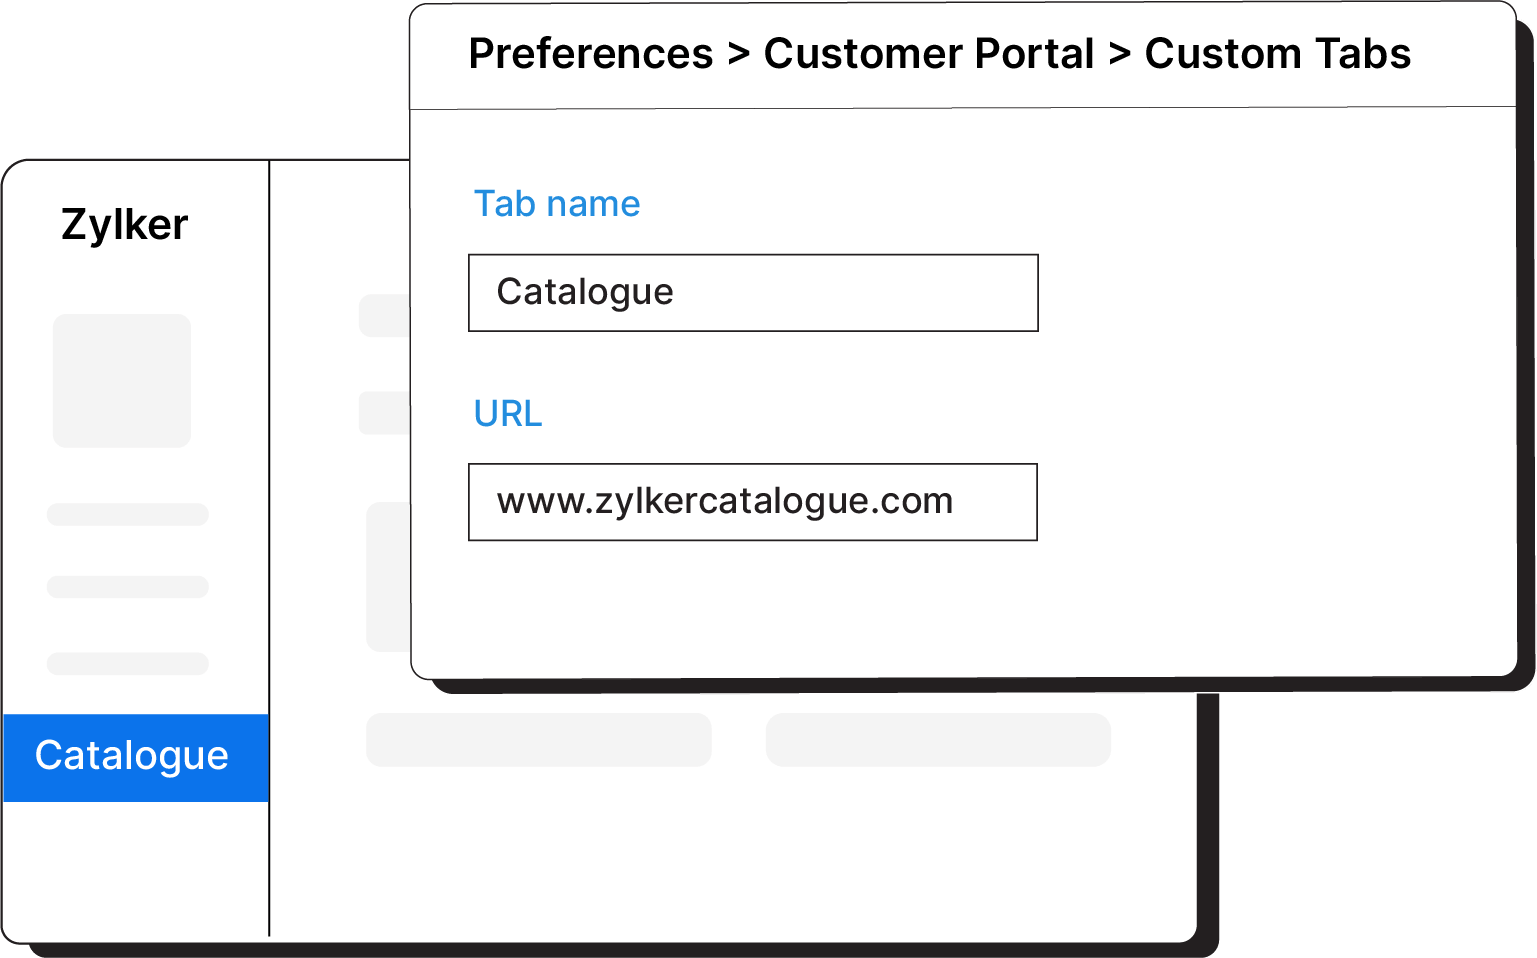 Display additional information to your customers in the Customer Portal